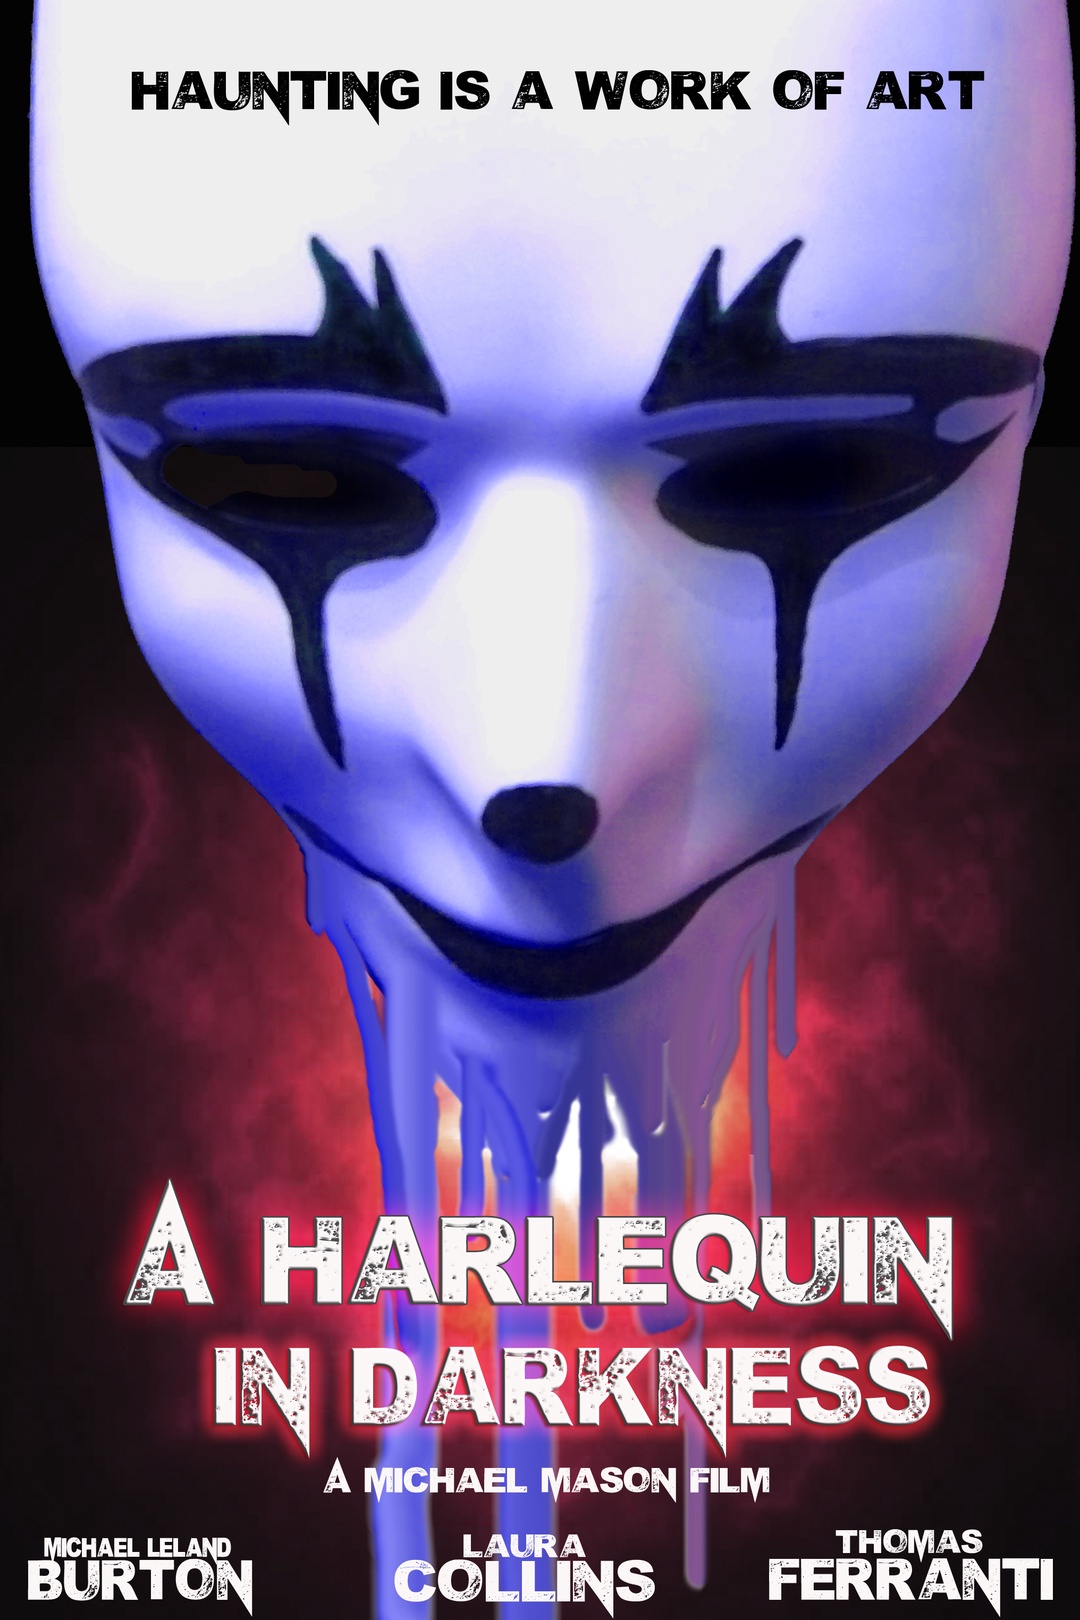 A Harlequin in Darkness